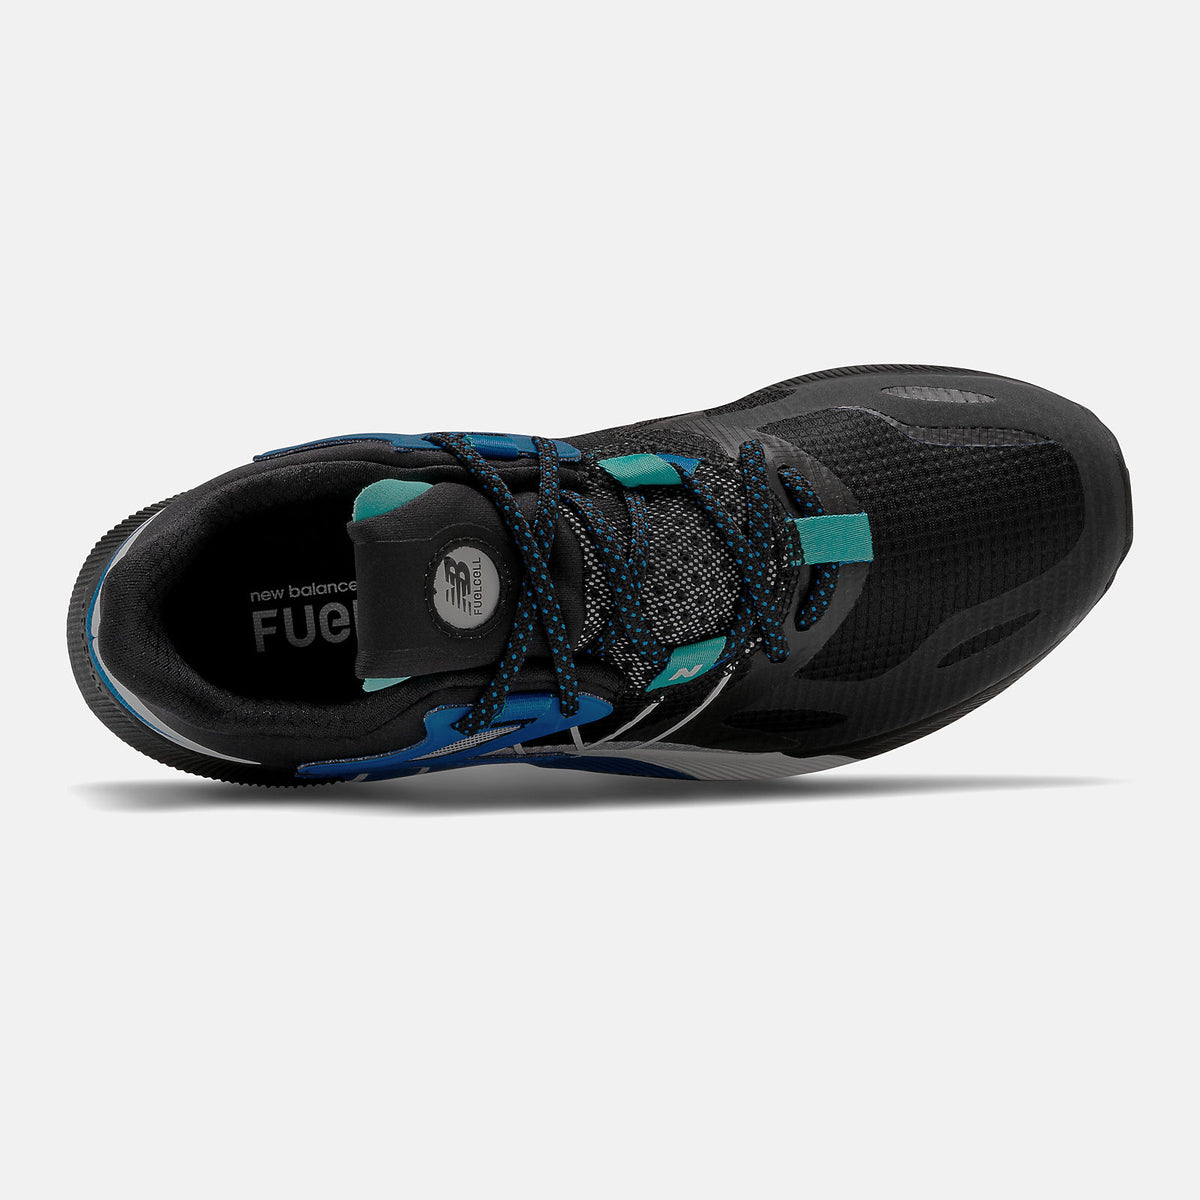 NEW BALANCE FUELCELL PROPEL RMX